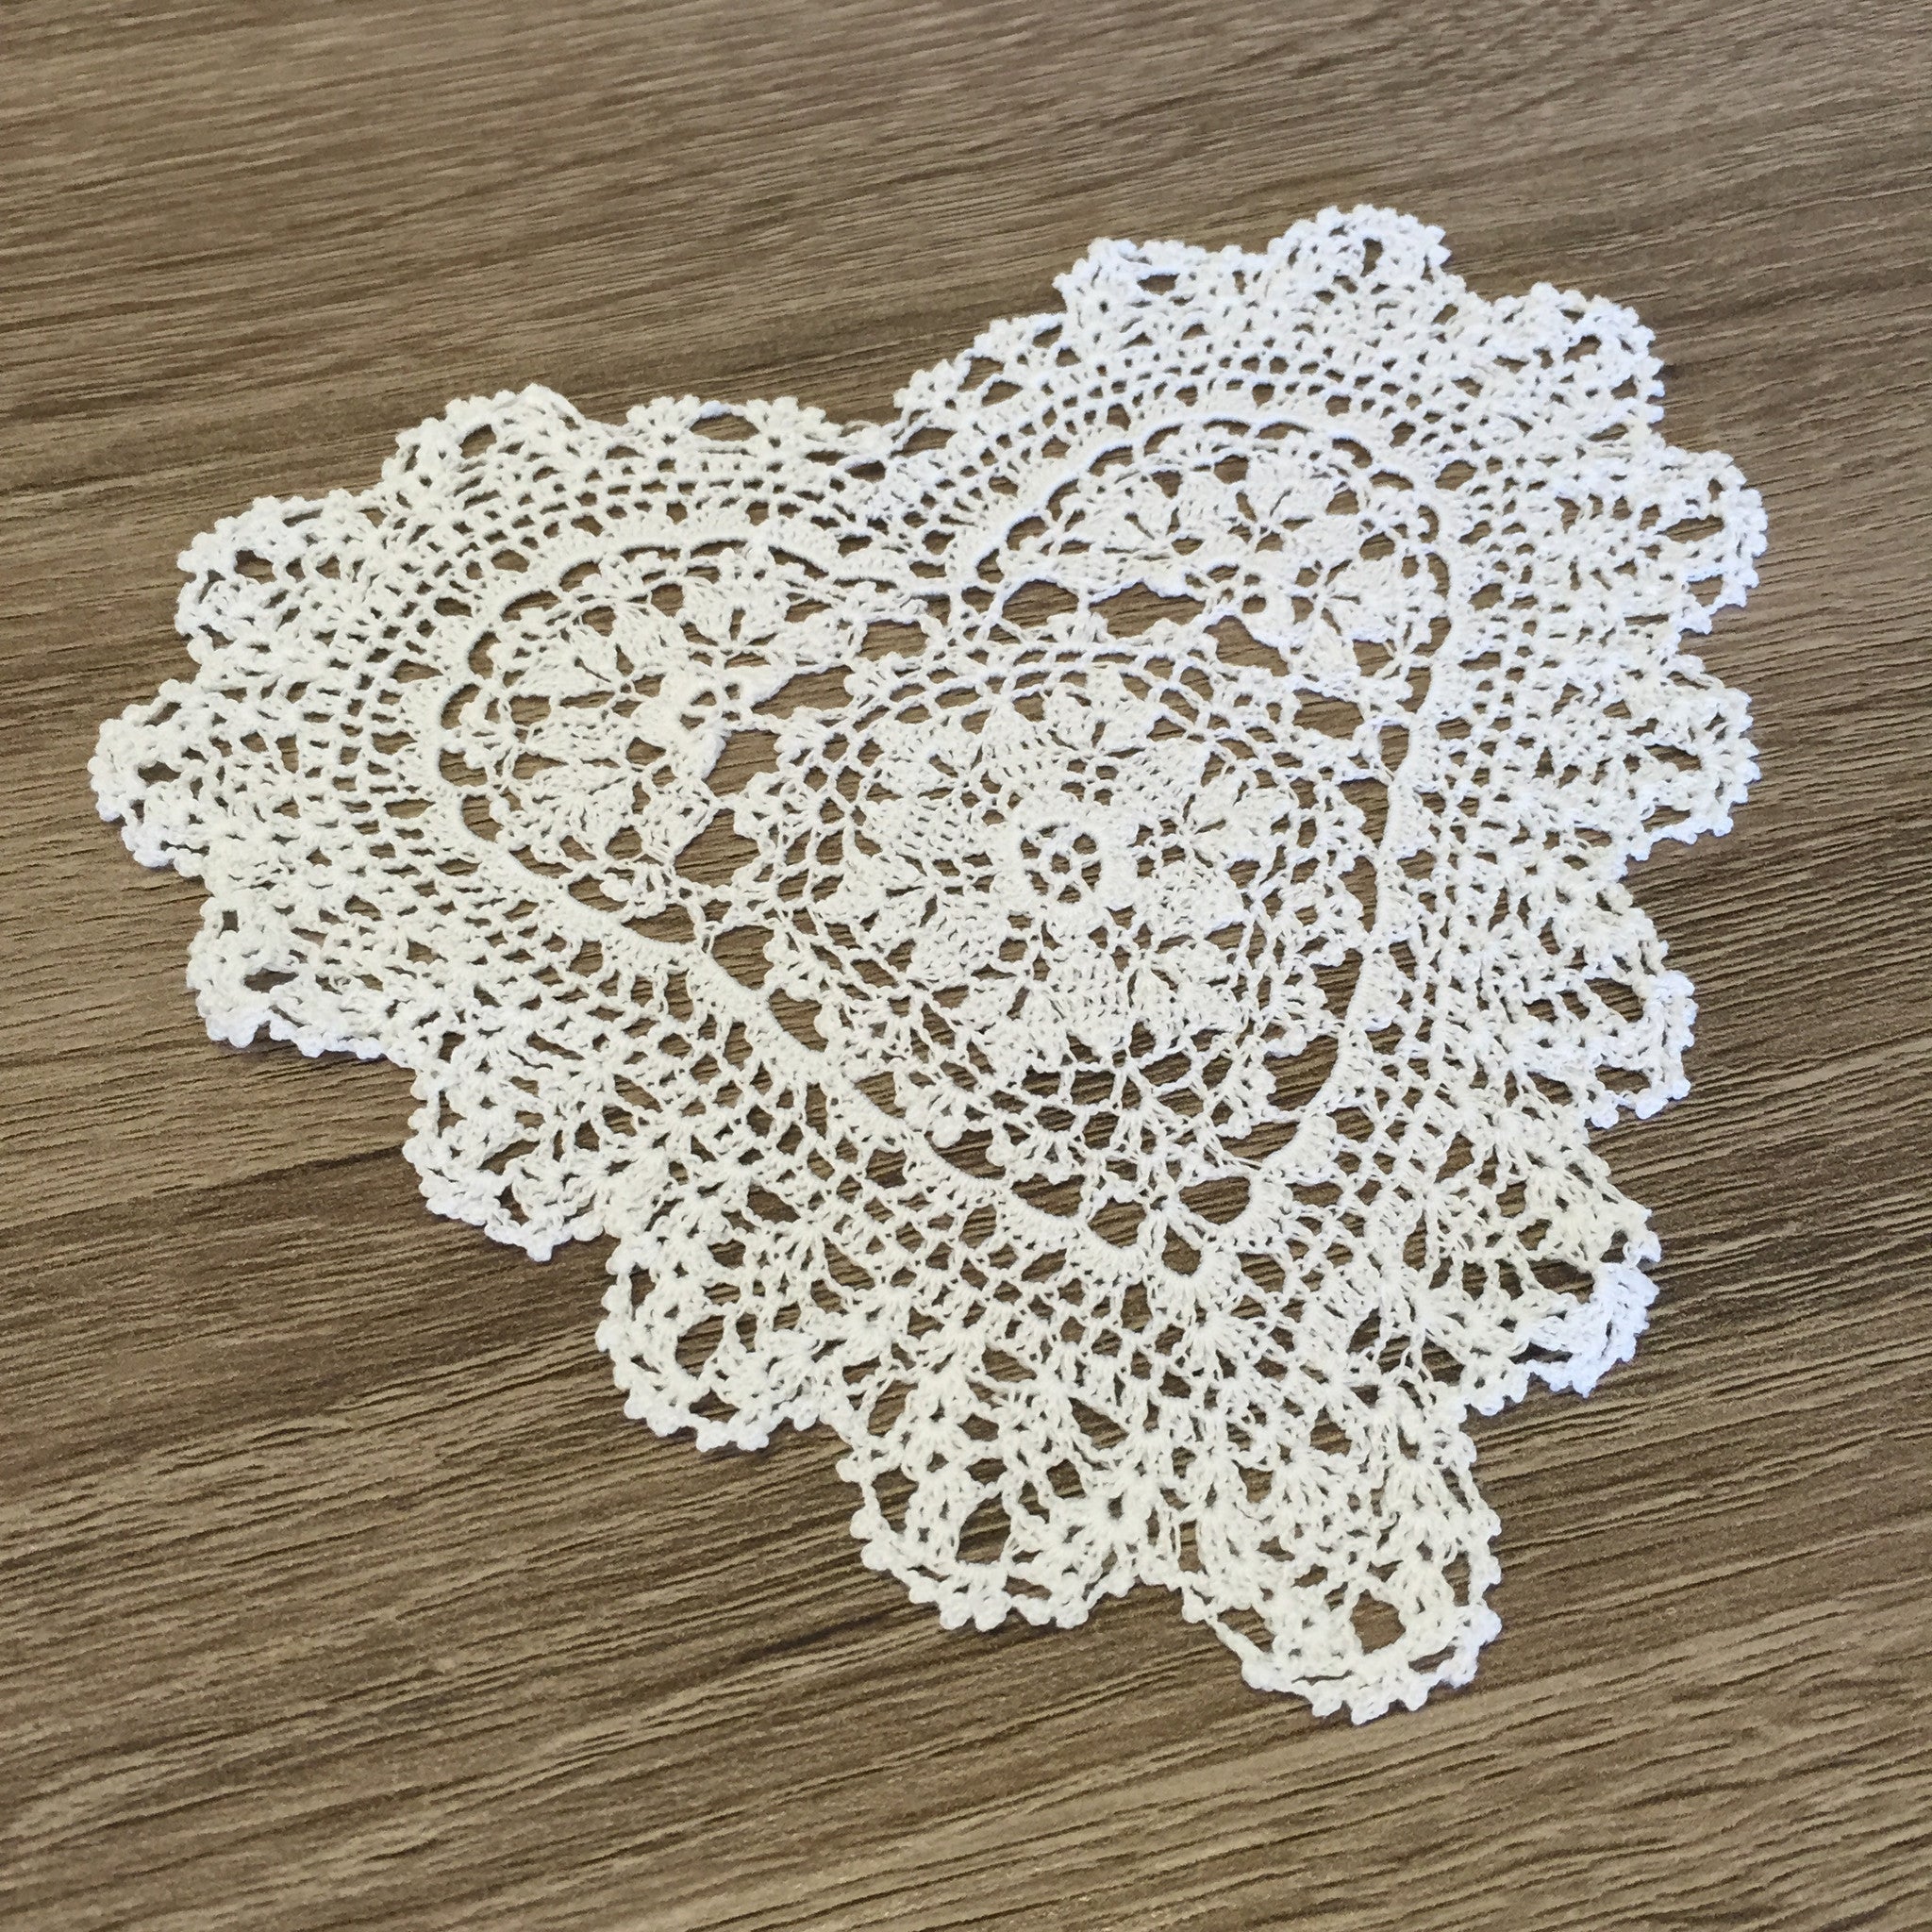 Strawberry Heart Shaped Doilies White 6" Inch Set of 12